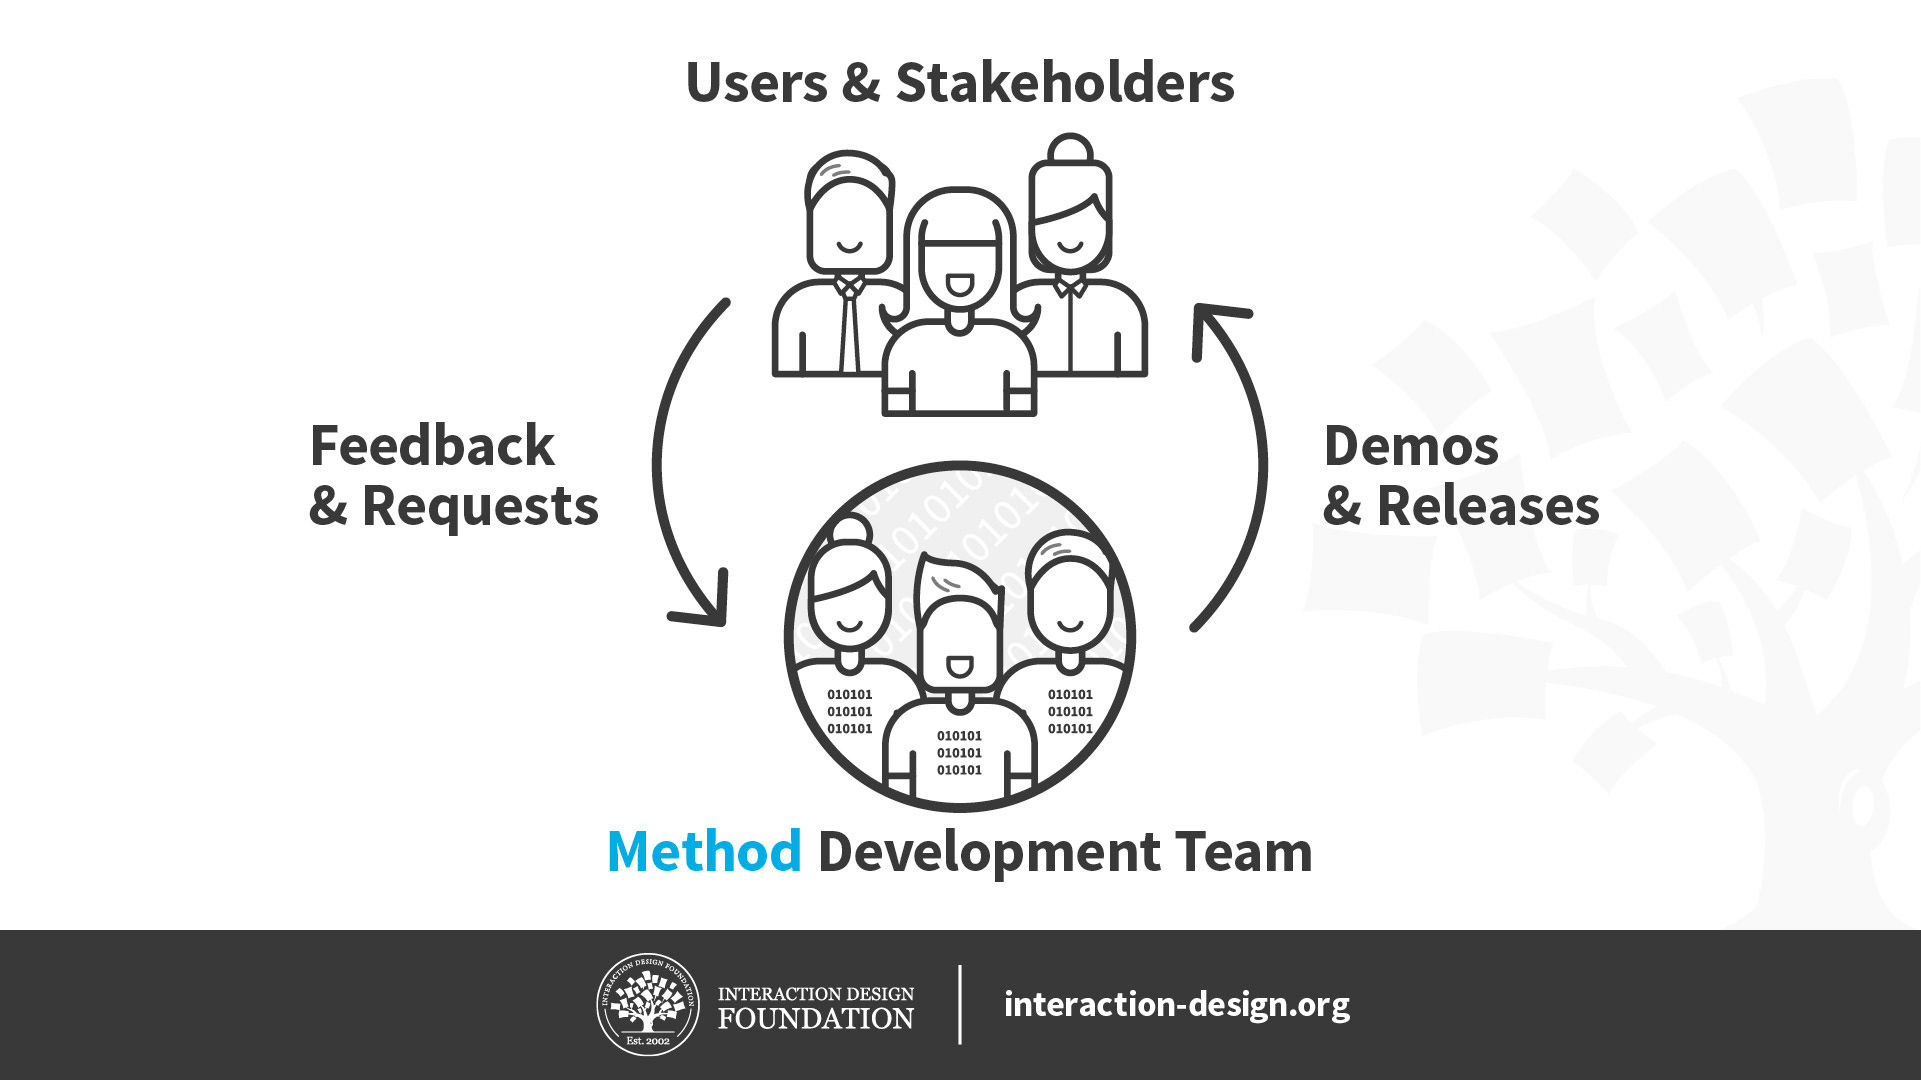 Illustration showing the feedback loop, with users giving feedback and requests to the development team and the development team sharing demos and new releases to users.